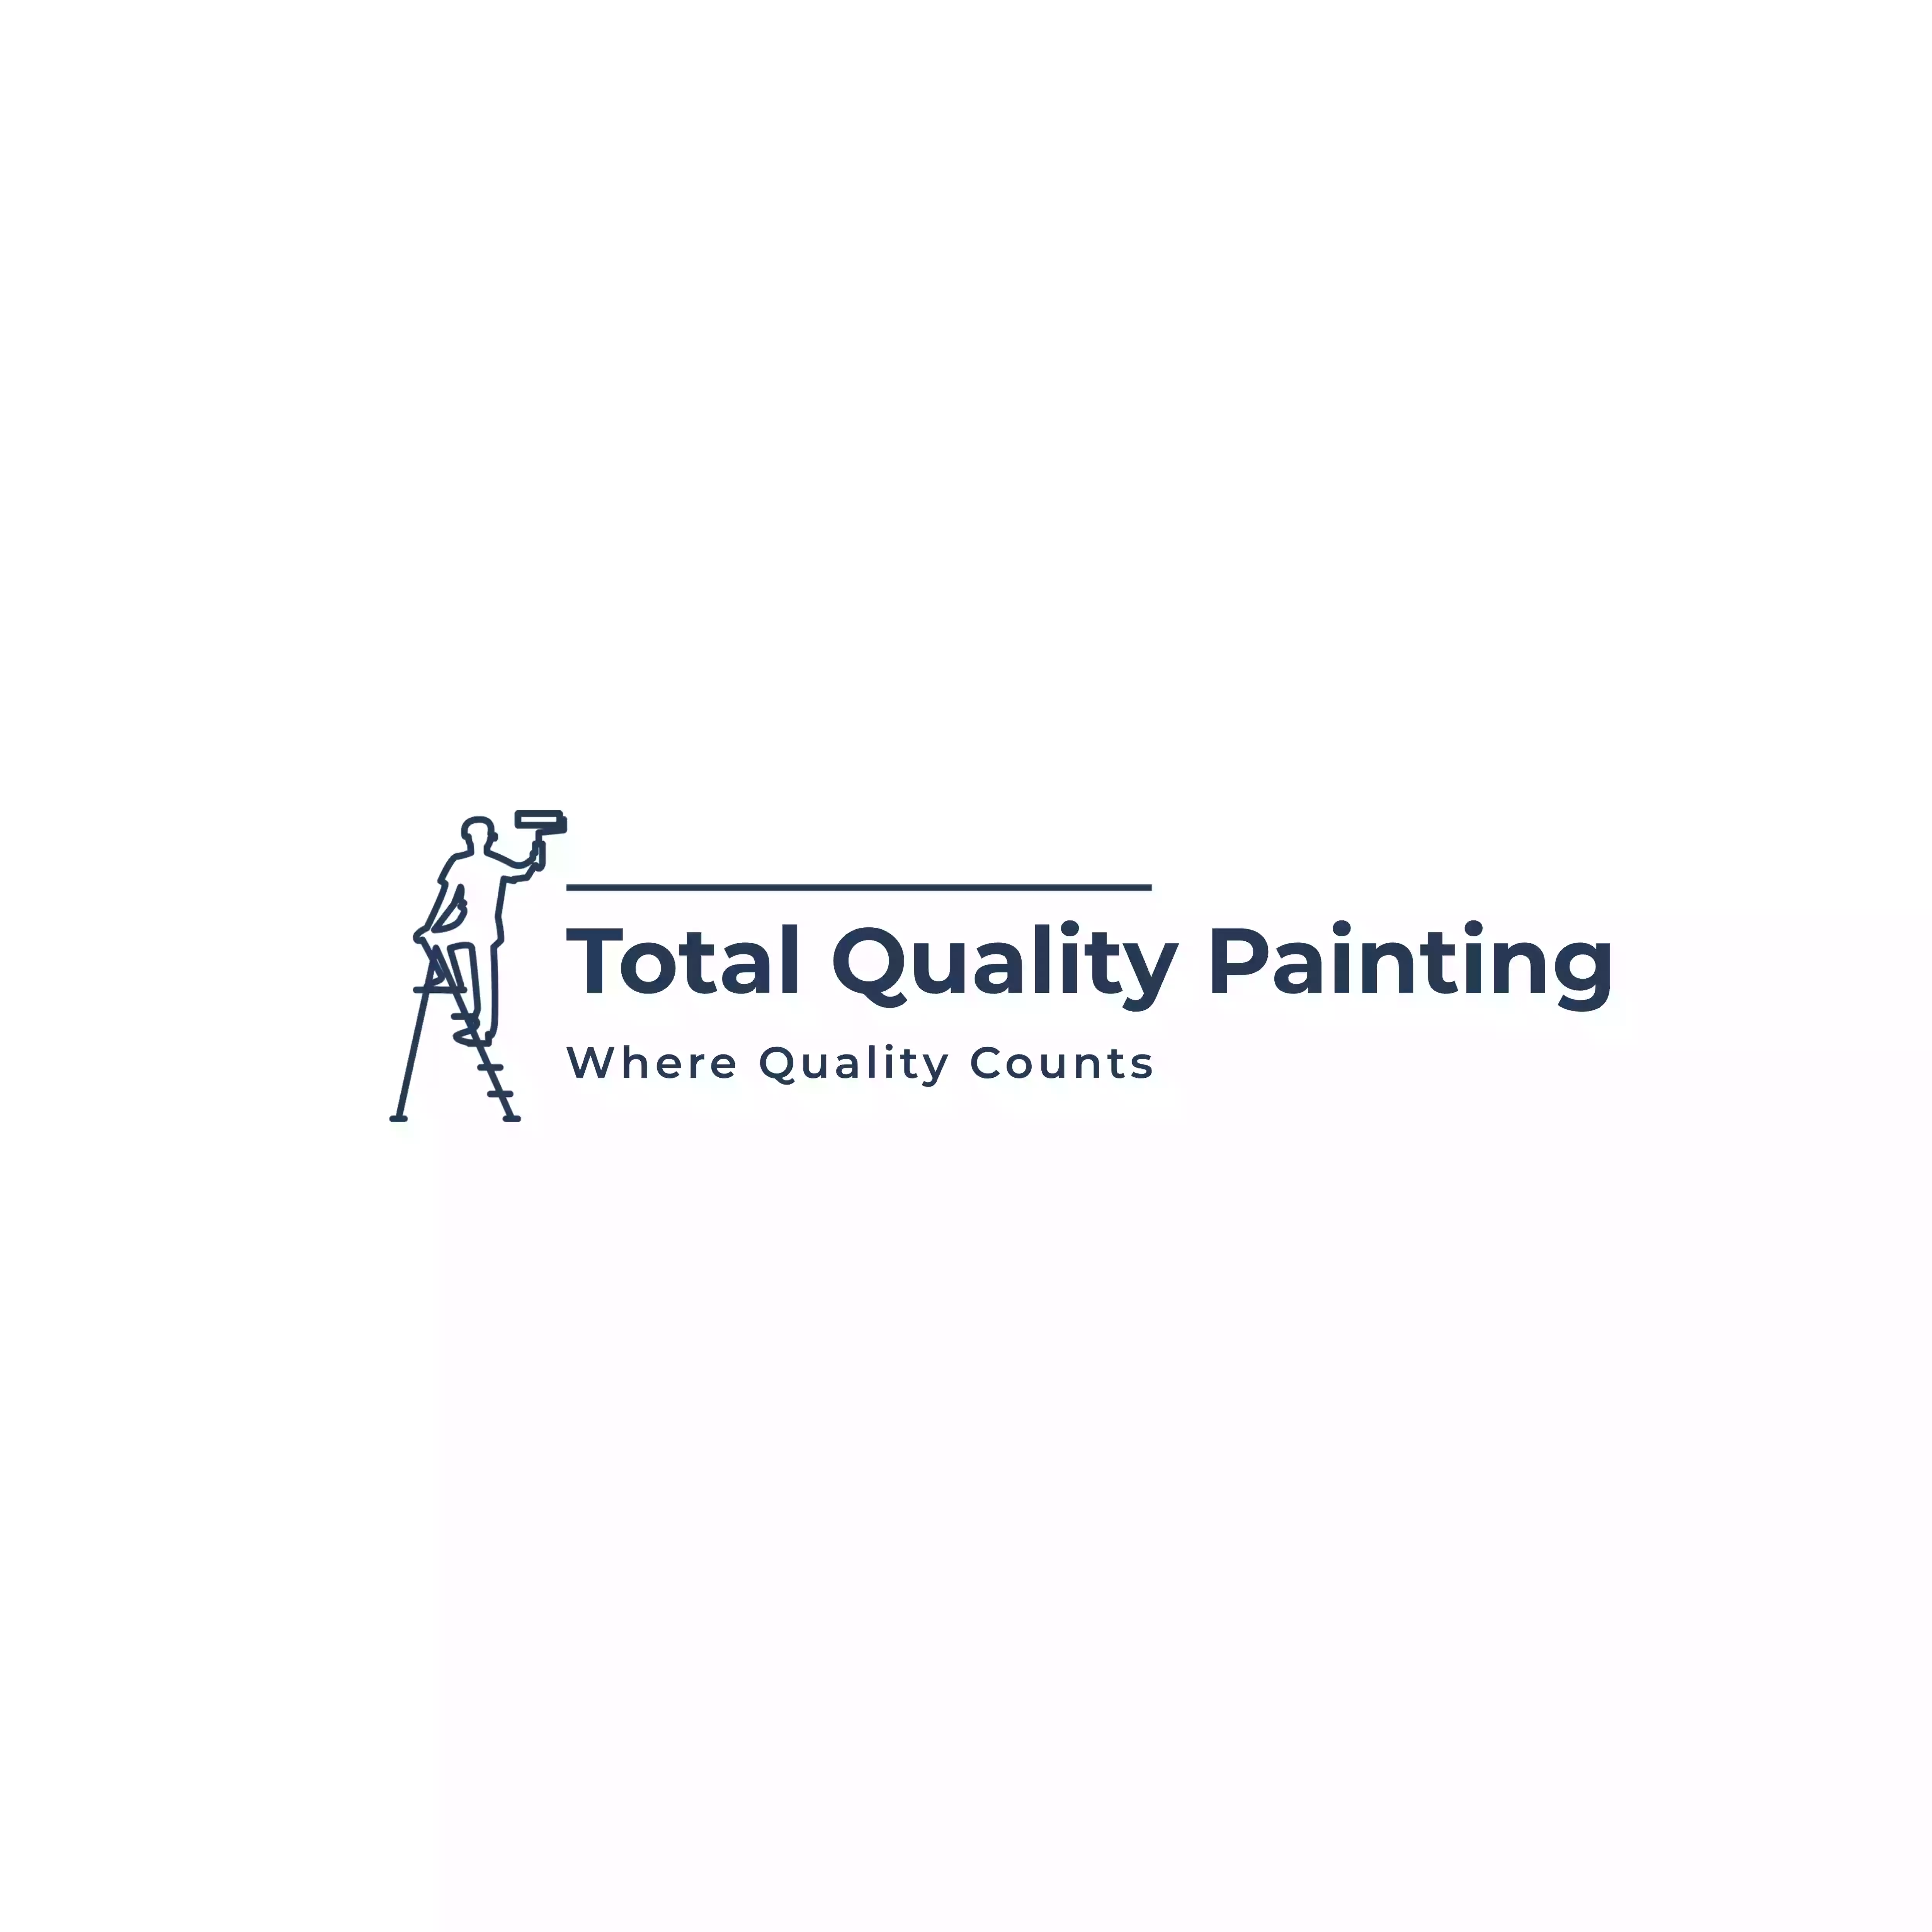 Total Quality Painting